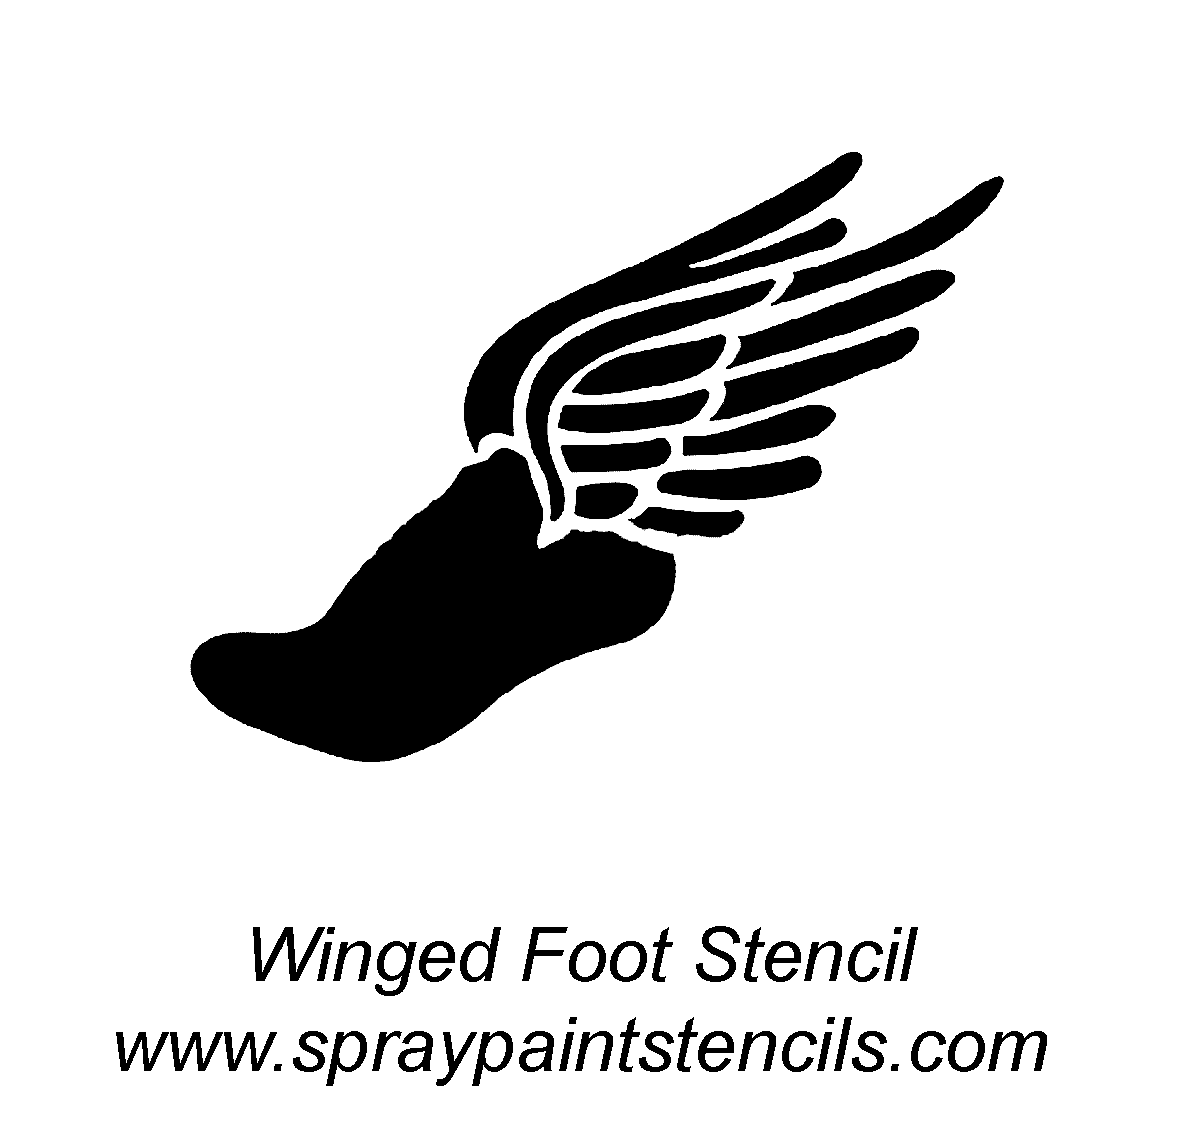 Who Has a Wing and a Foot Logo - Winged foot Logos